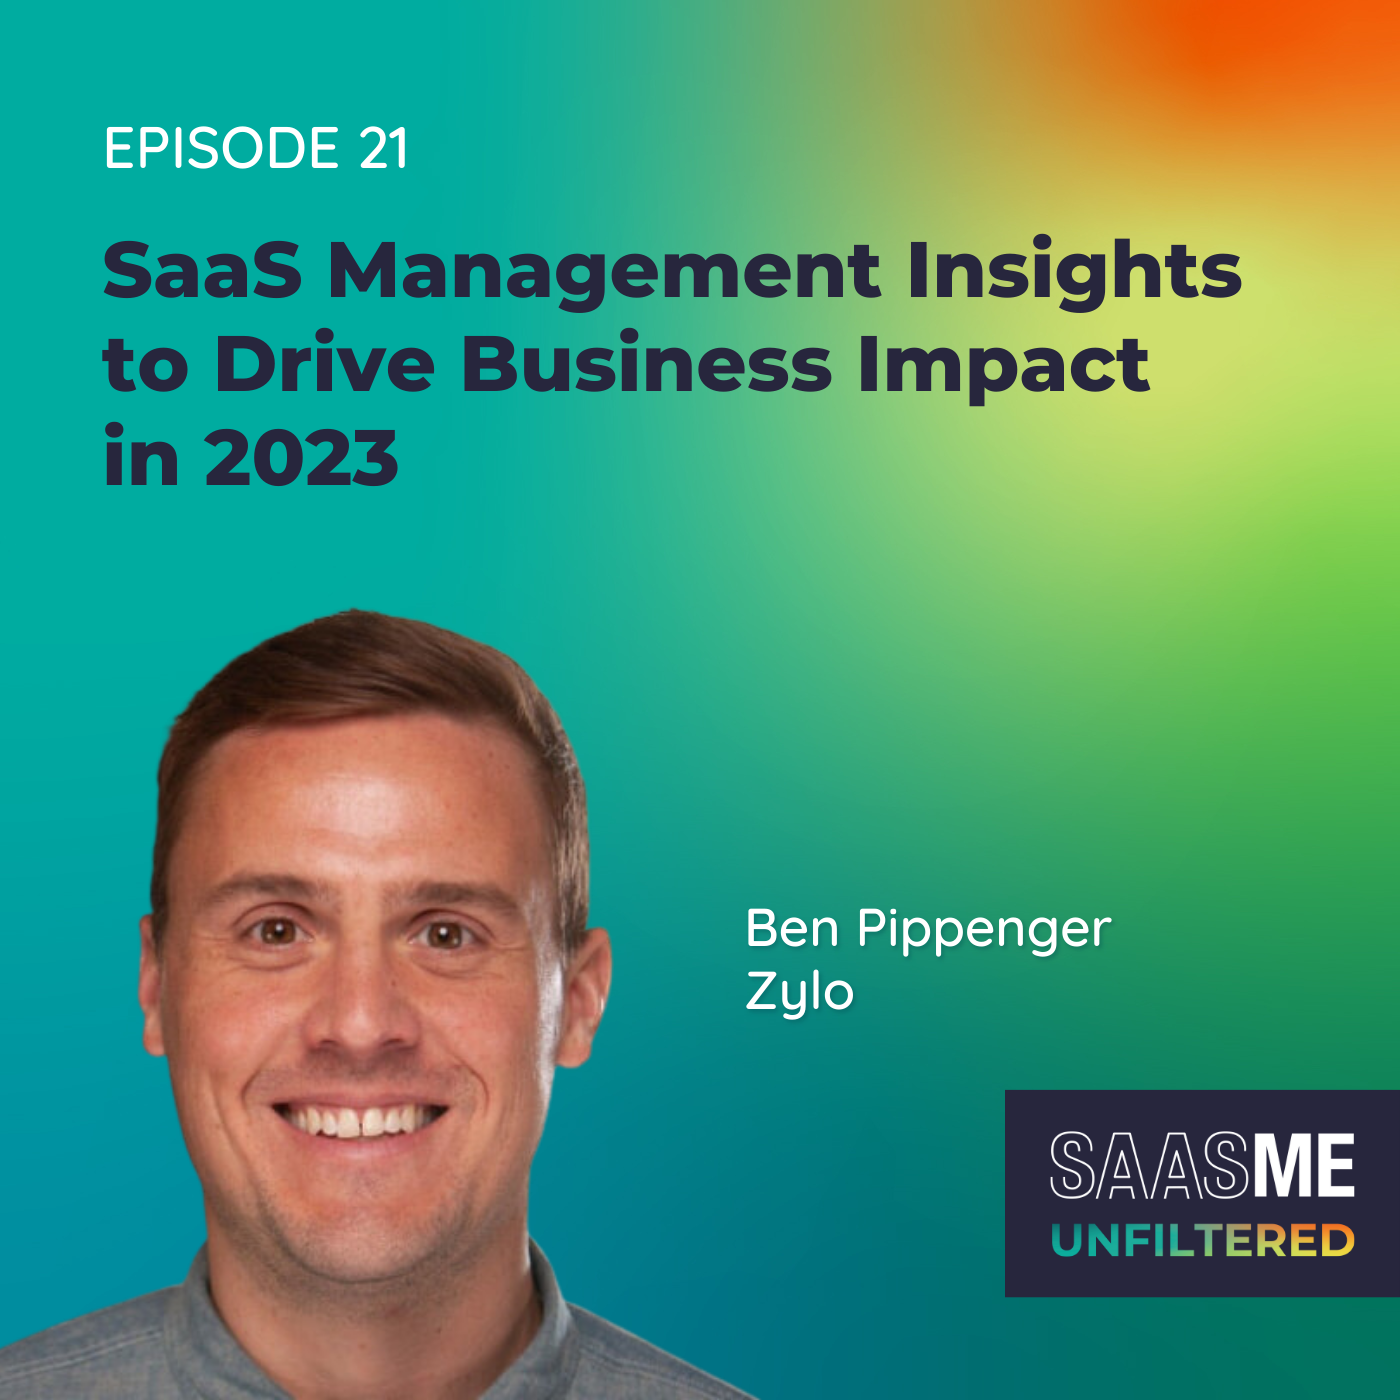 Ben Pippenger: SaaS Management Insights to Drive Business Impact in 2023